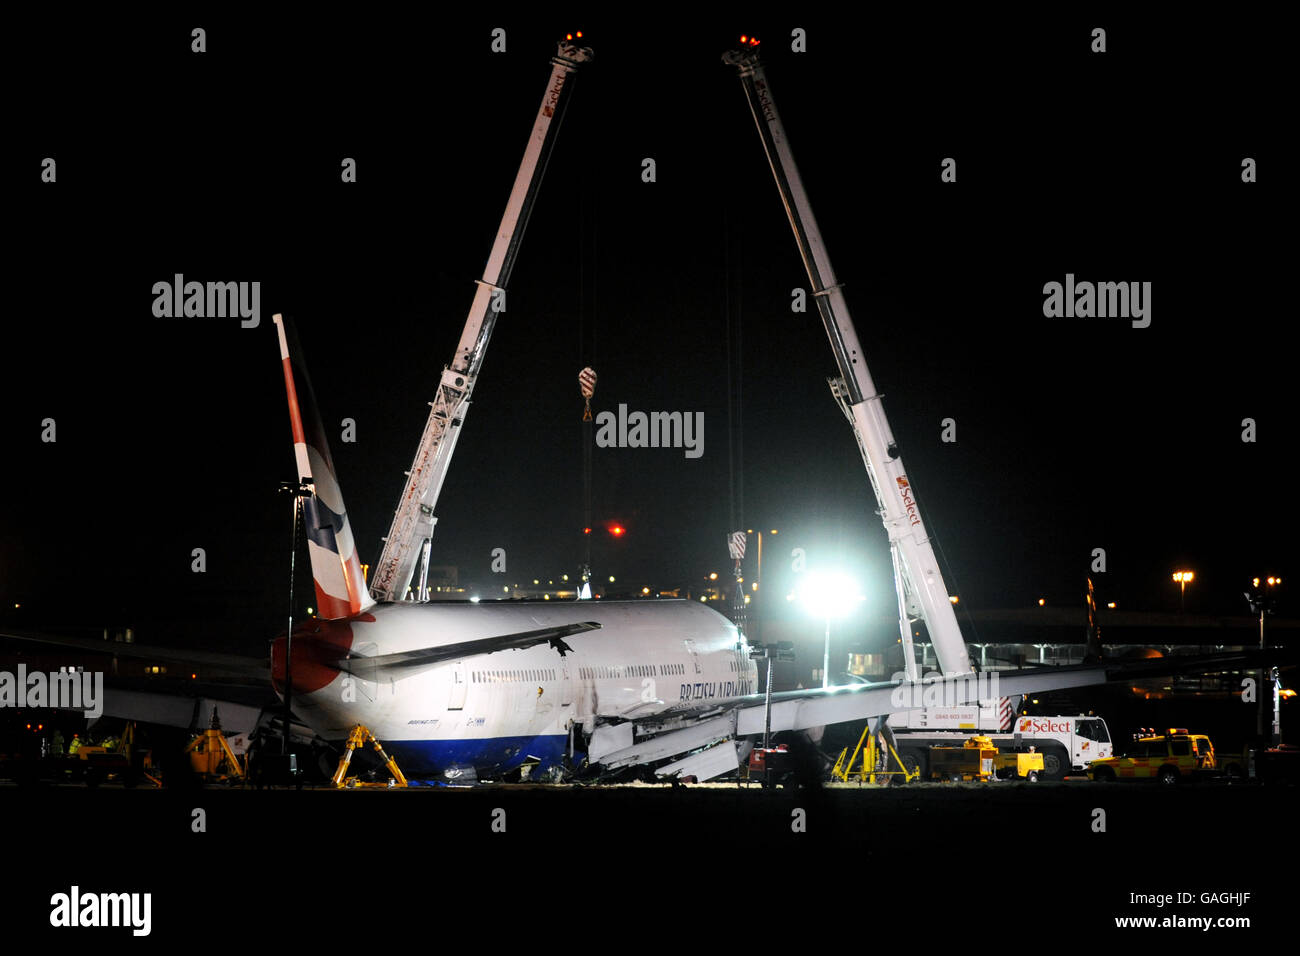 The British Airways Boeing 777 plane that crash landed at Heathrow airport yesterday afternoon, is held up off the ground by two giant cranes this evening. Stock Photo